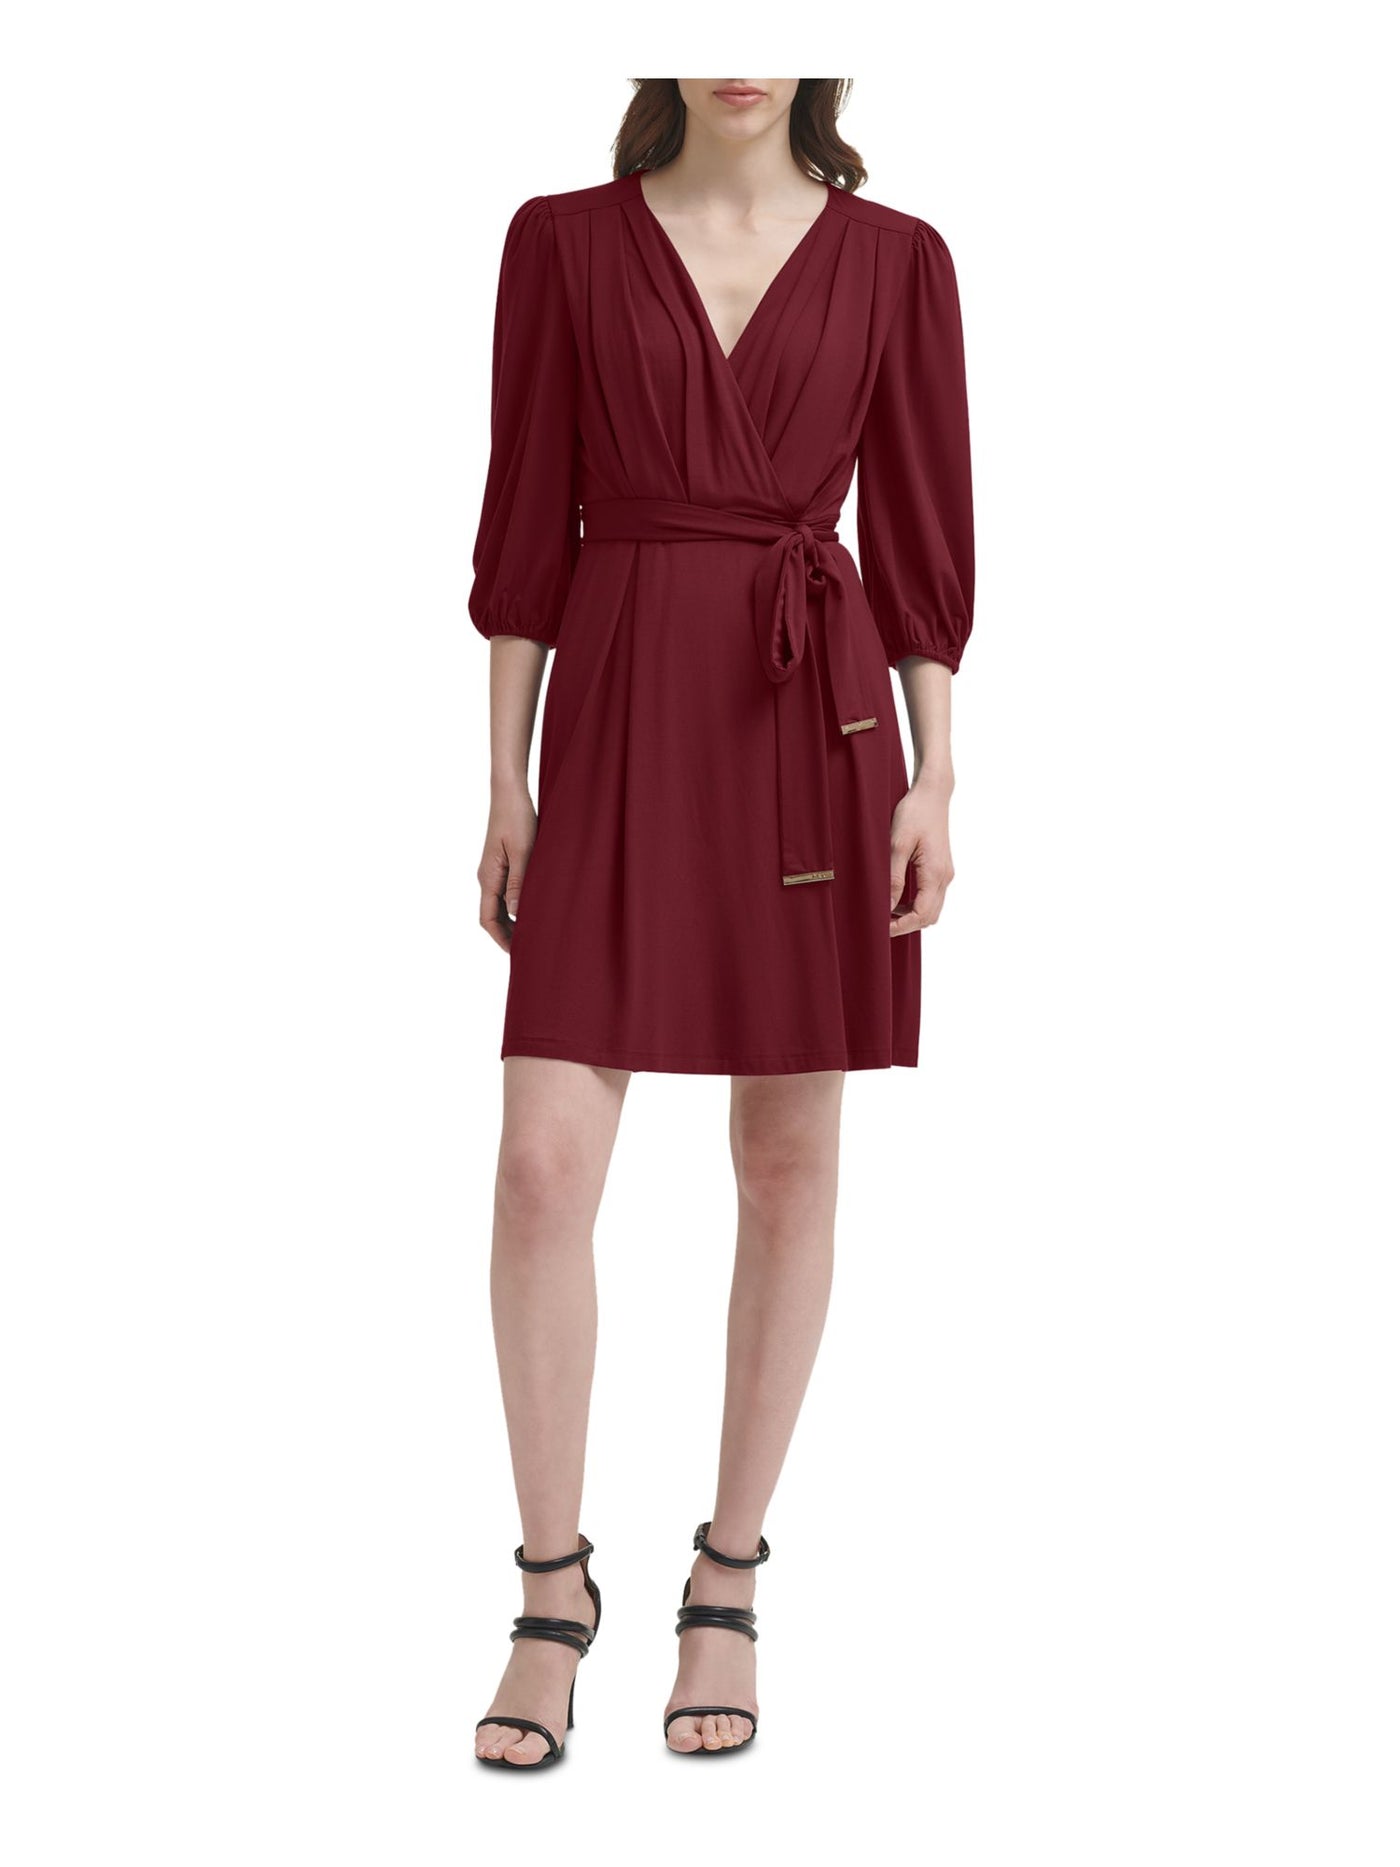 DKNY Womens Burgundy Zippered Self Tie Belted Waist Lined 3/4 Sleeve V Neck Above The Knee Party Faux Wrap Dress 6